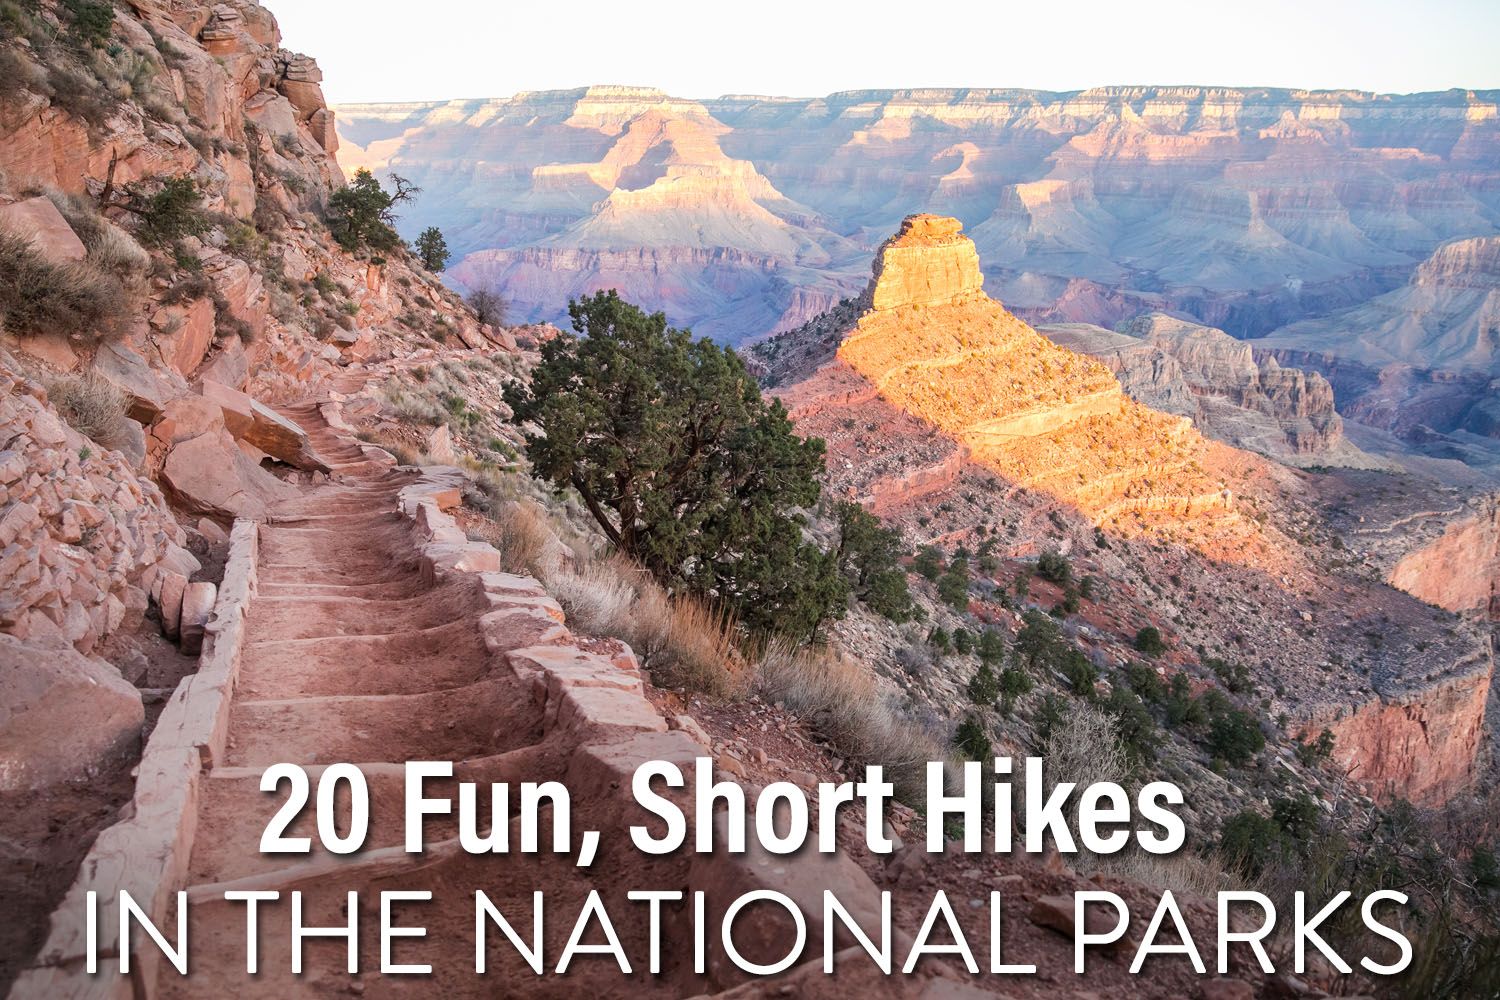 Short Hikes in National Parks